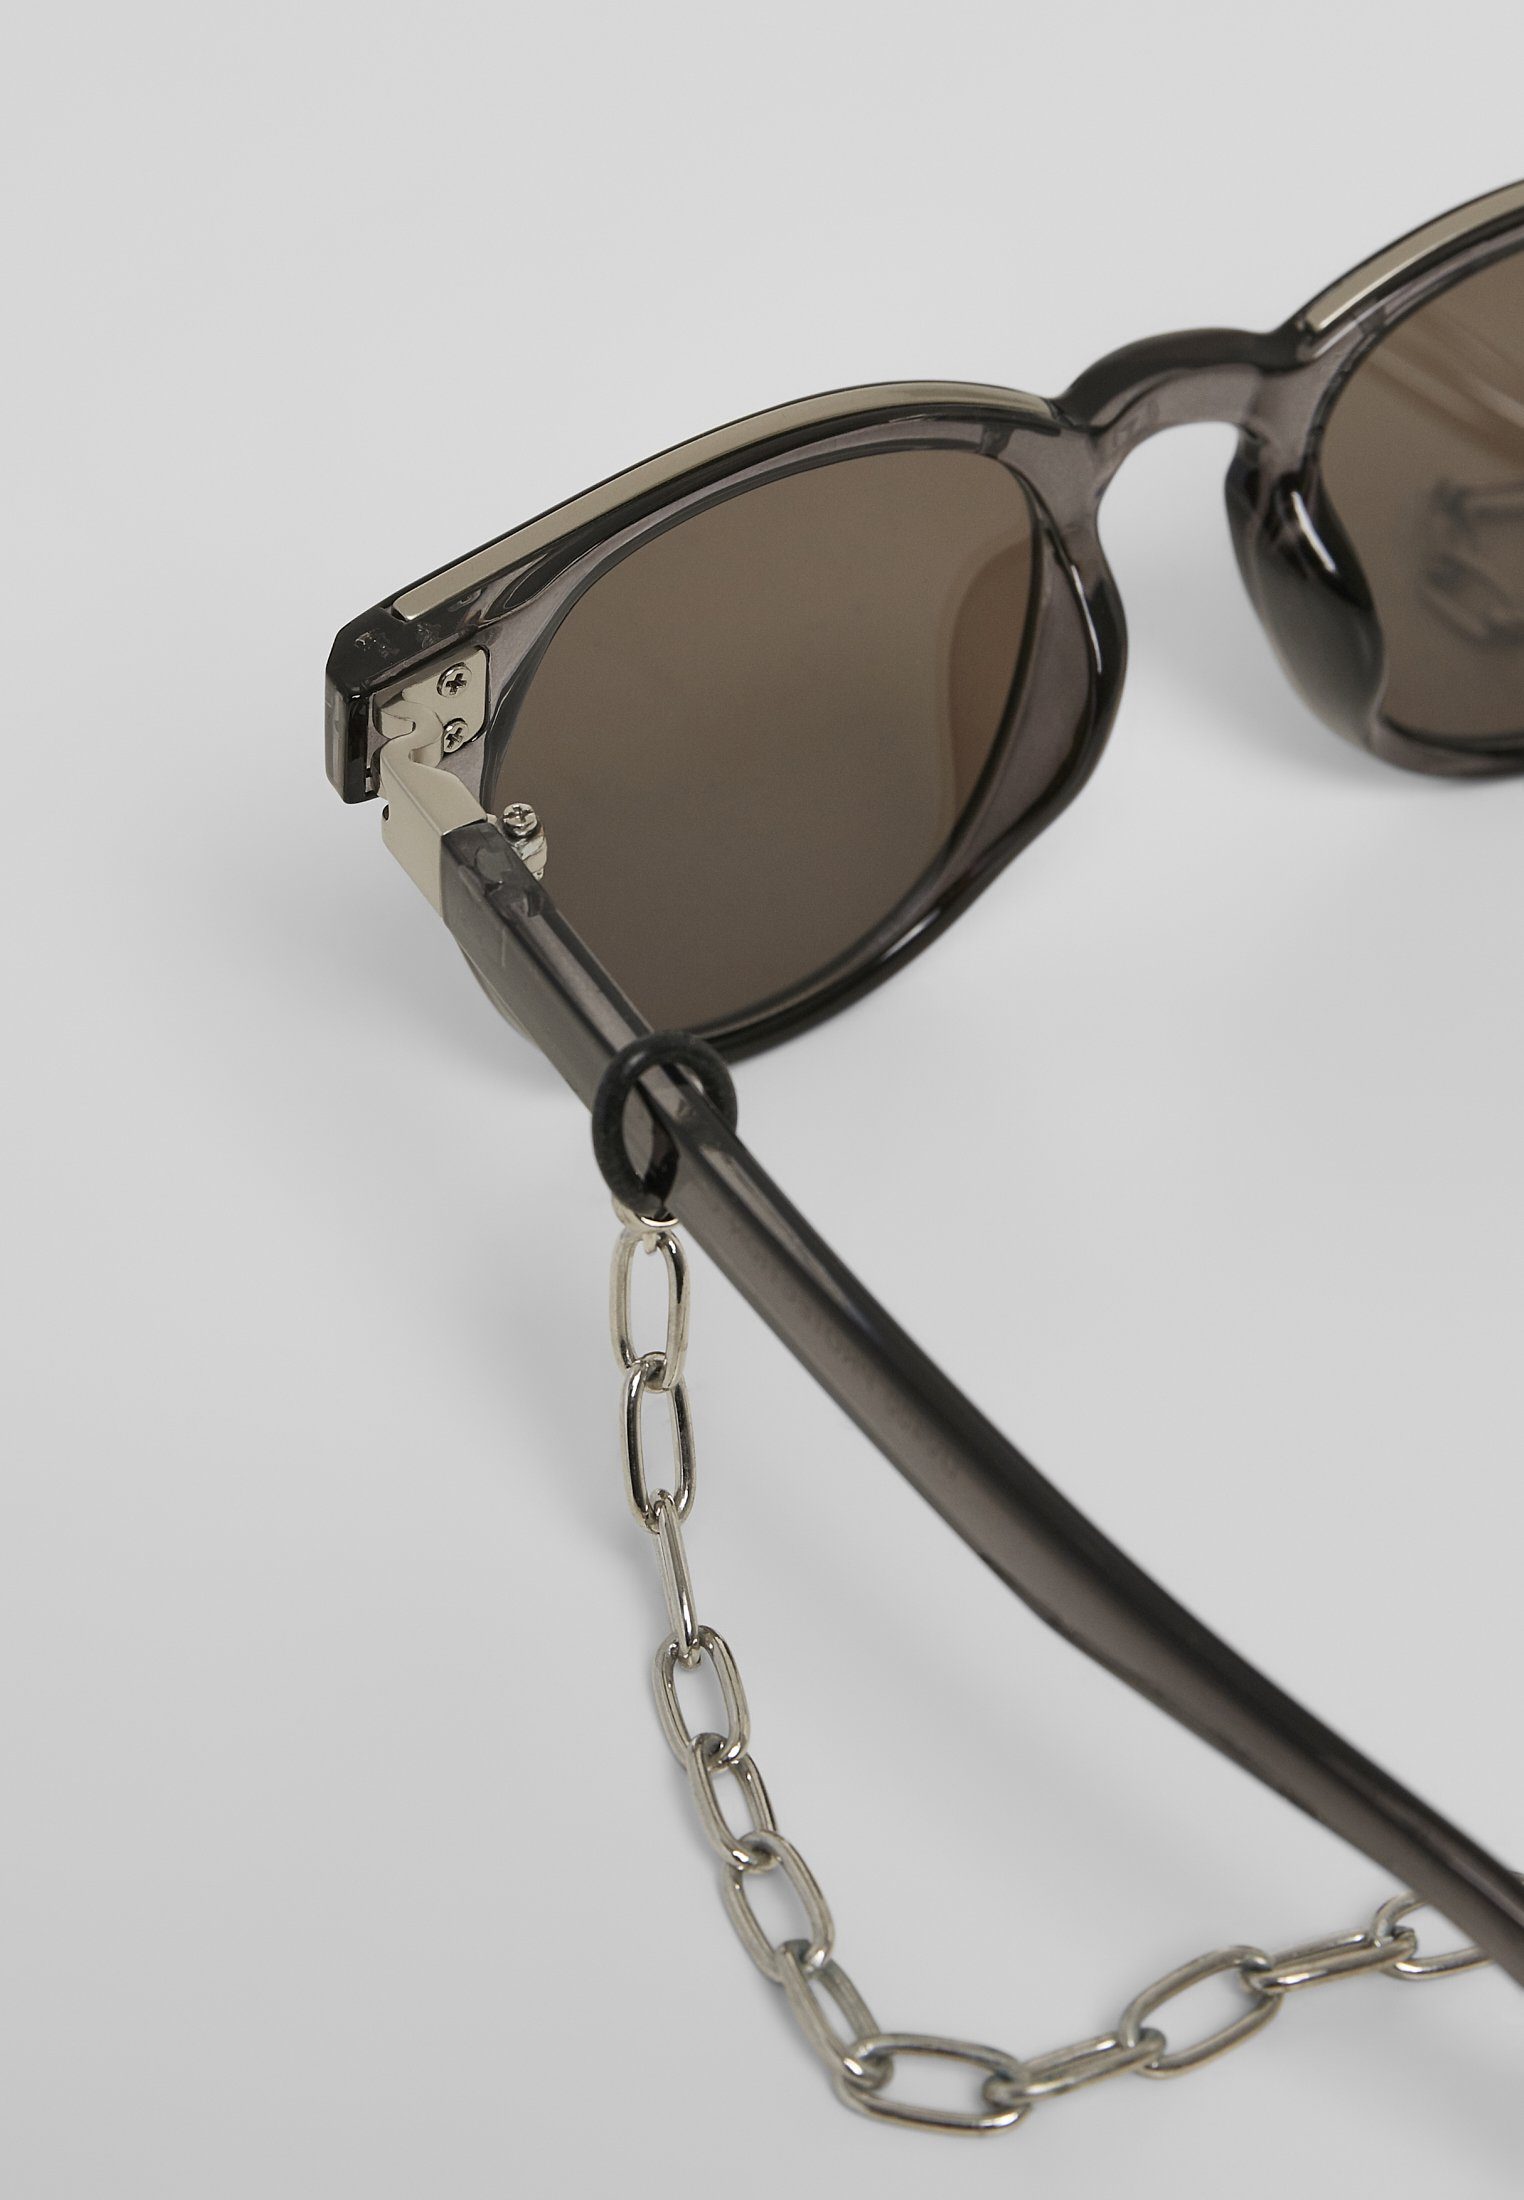 CLASSICS Sonnenbrille Unisex grey/silver/silver Italy with chain URBAN Sunglasses